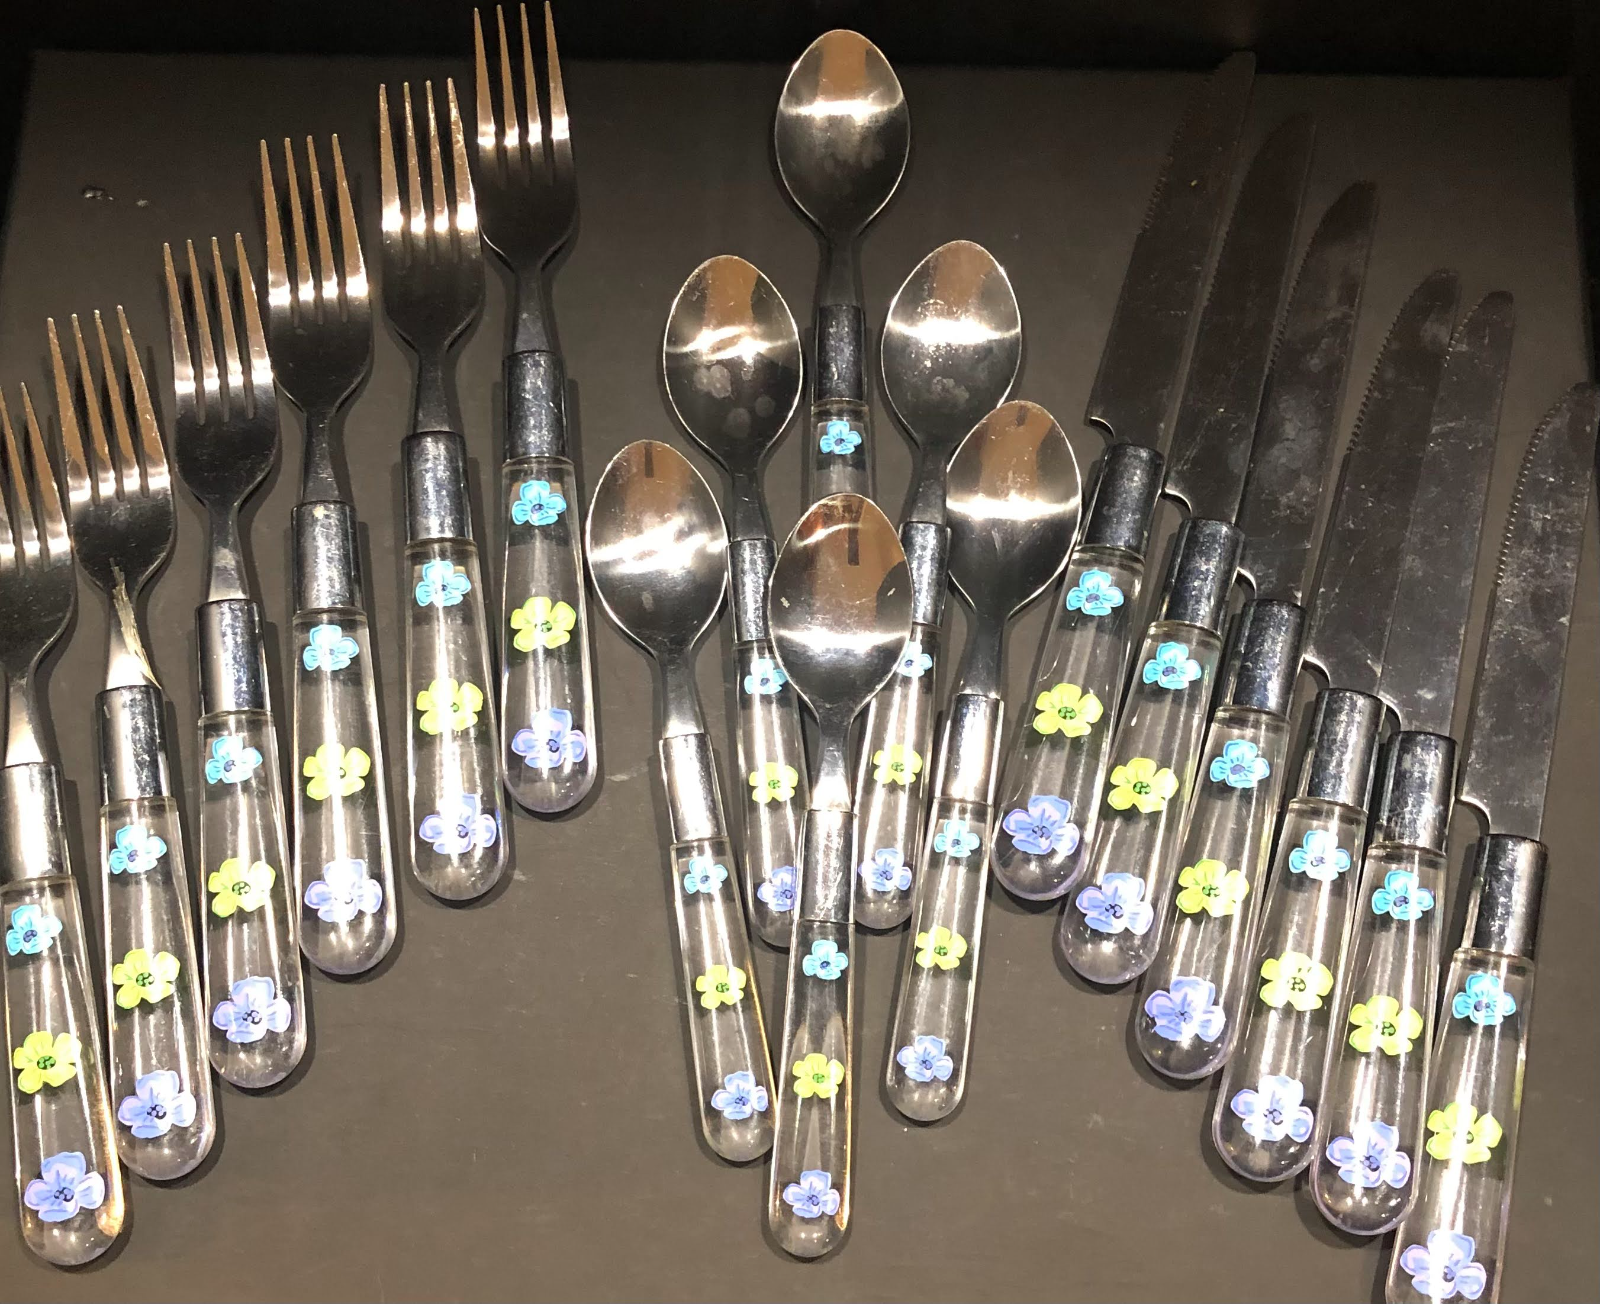 Vintage Retro Lot18 Pieces Flower Clear Plastic Handles Stainless Flatware China Unbranded